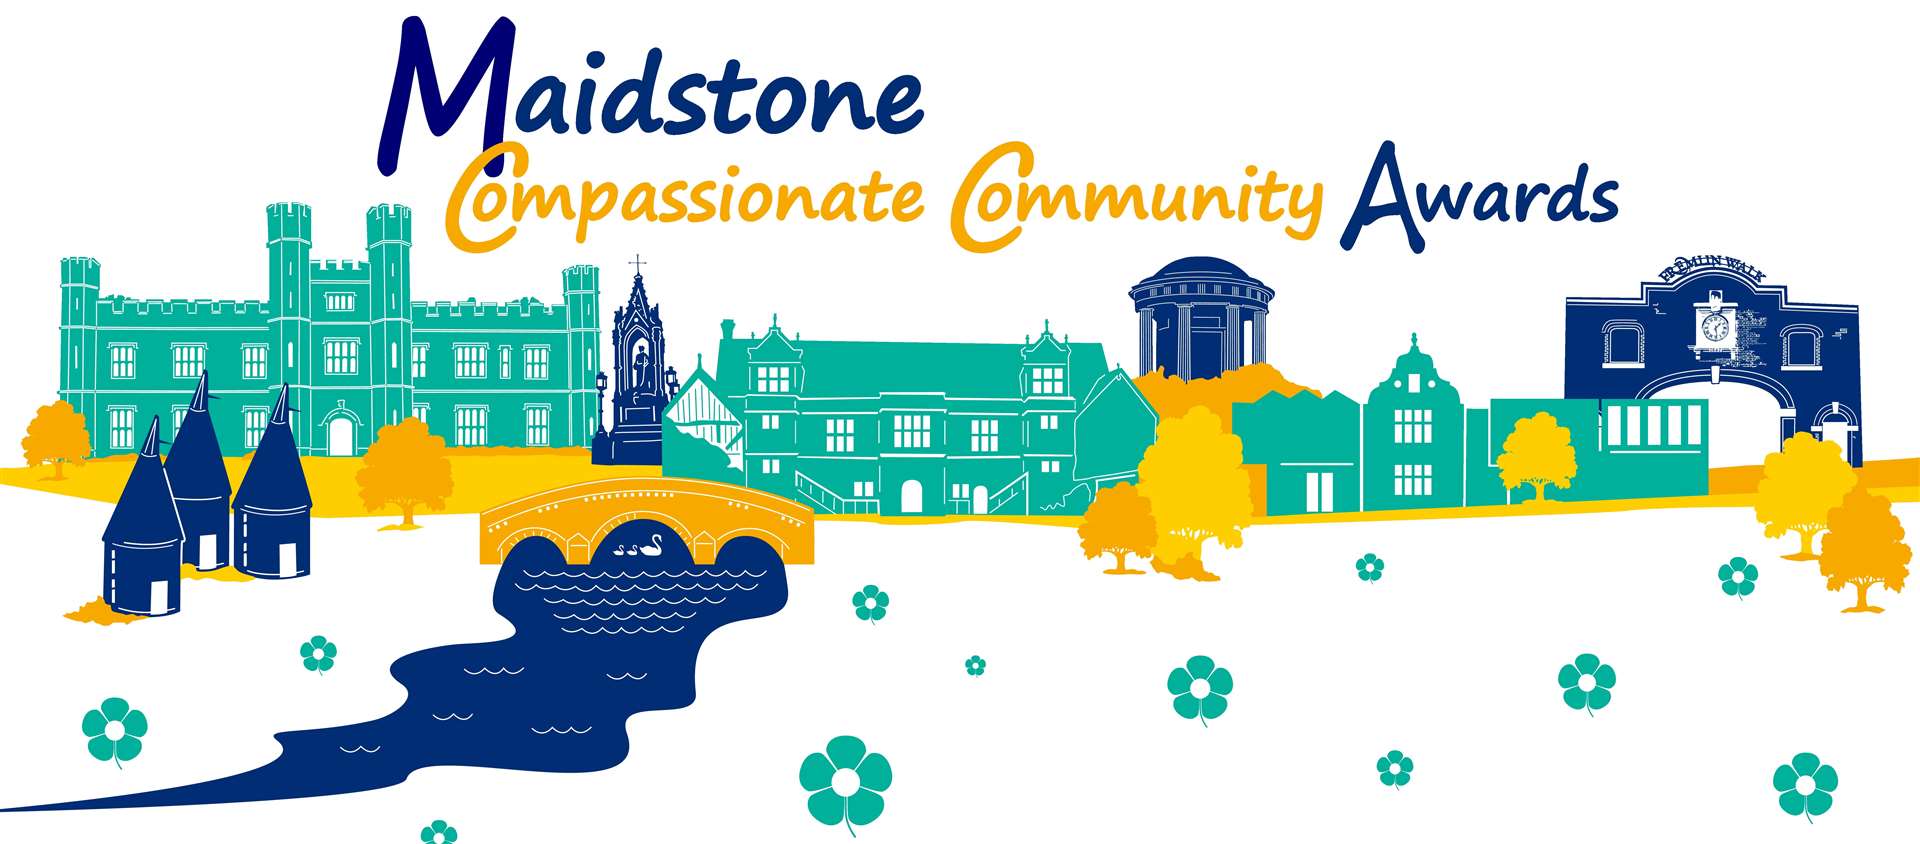 Maidstone Borough Council and The Heart of Kent Hospice have launched the Compassionate Community Awards 2020